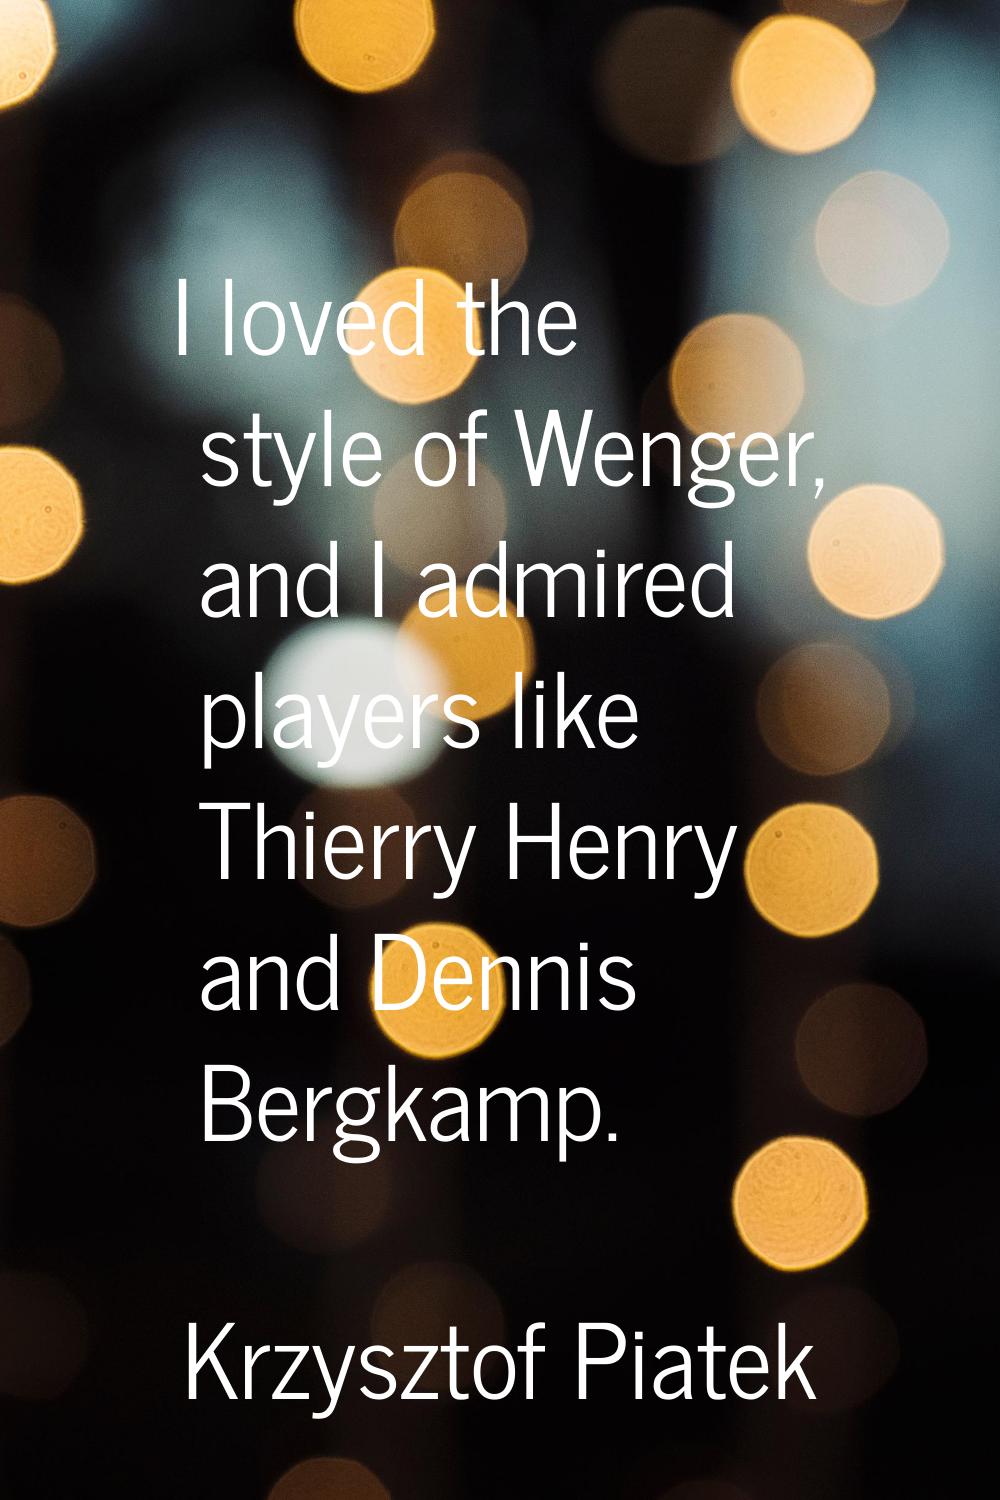 I loved the style of Wenger, and I admired players like Thierry Henry and Dennis Bergkamp.